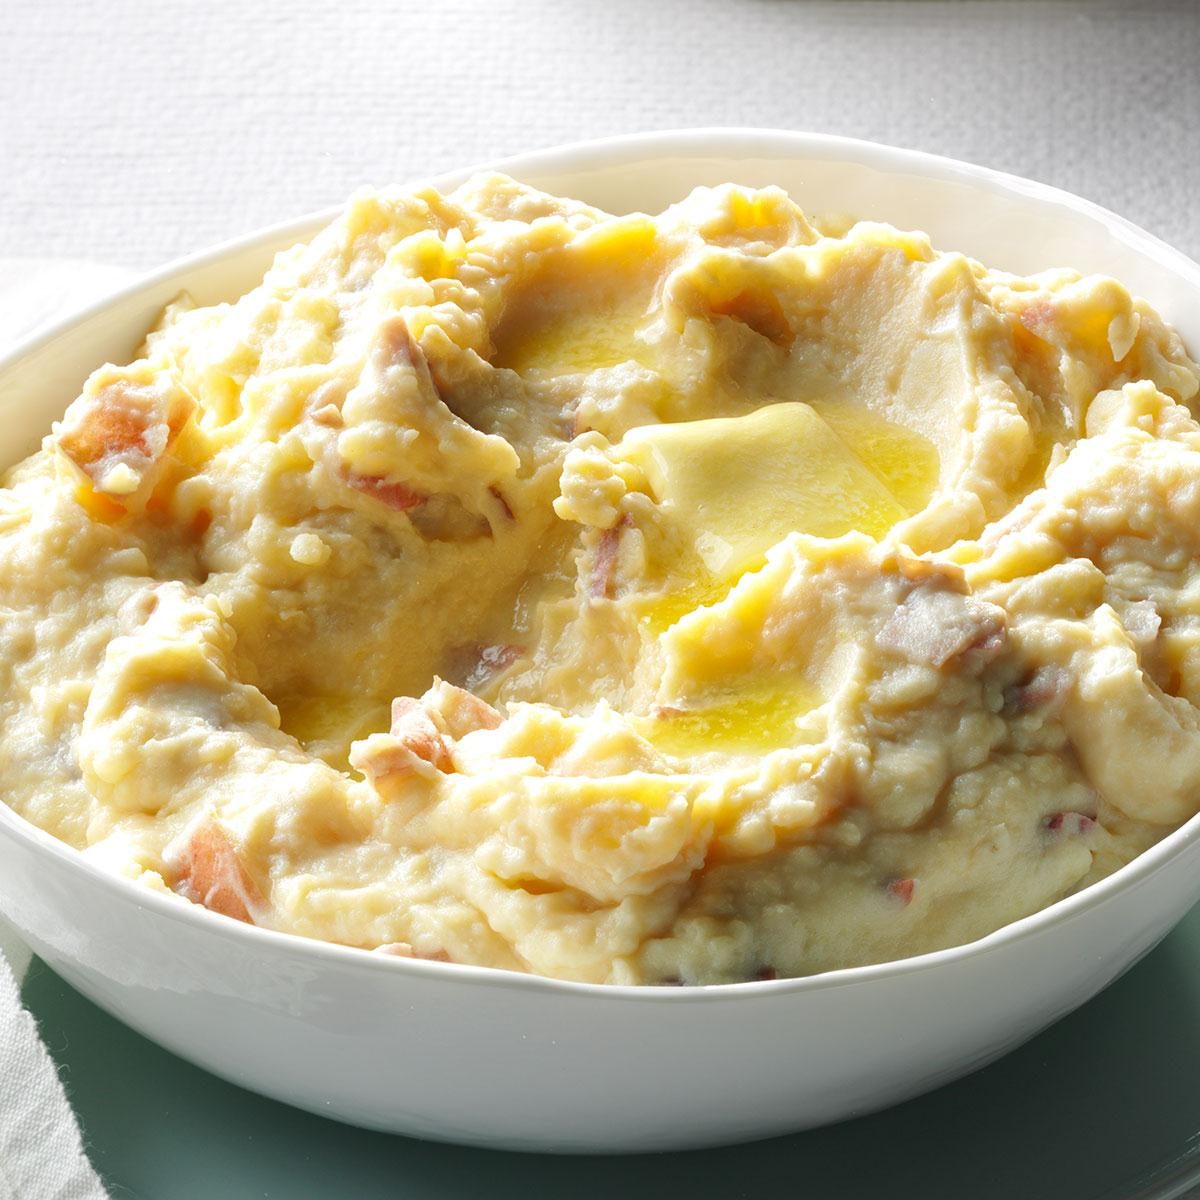 Rich & Creamy Parmesan Mashed Potatoes Recipe: How to Make It